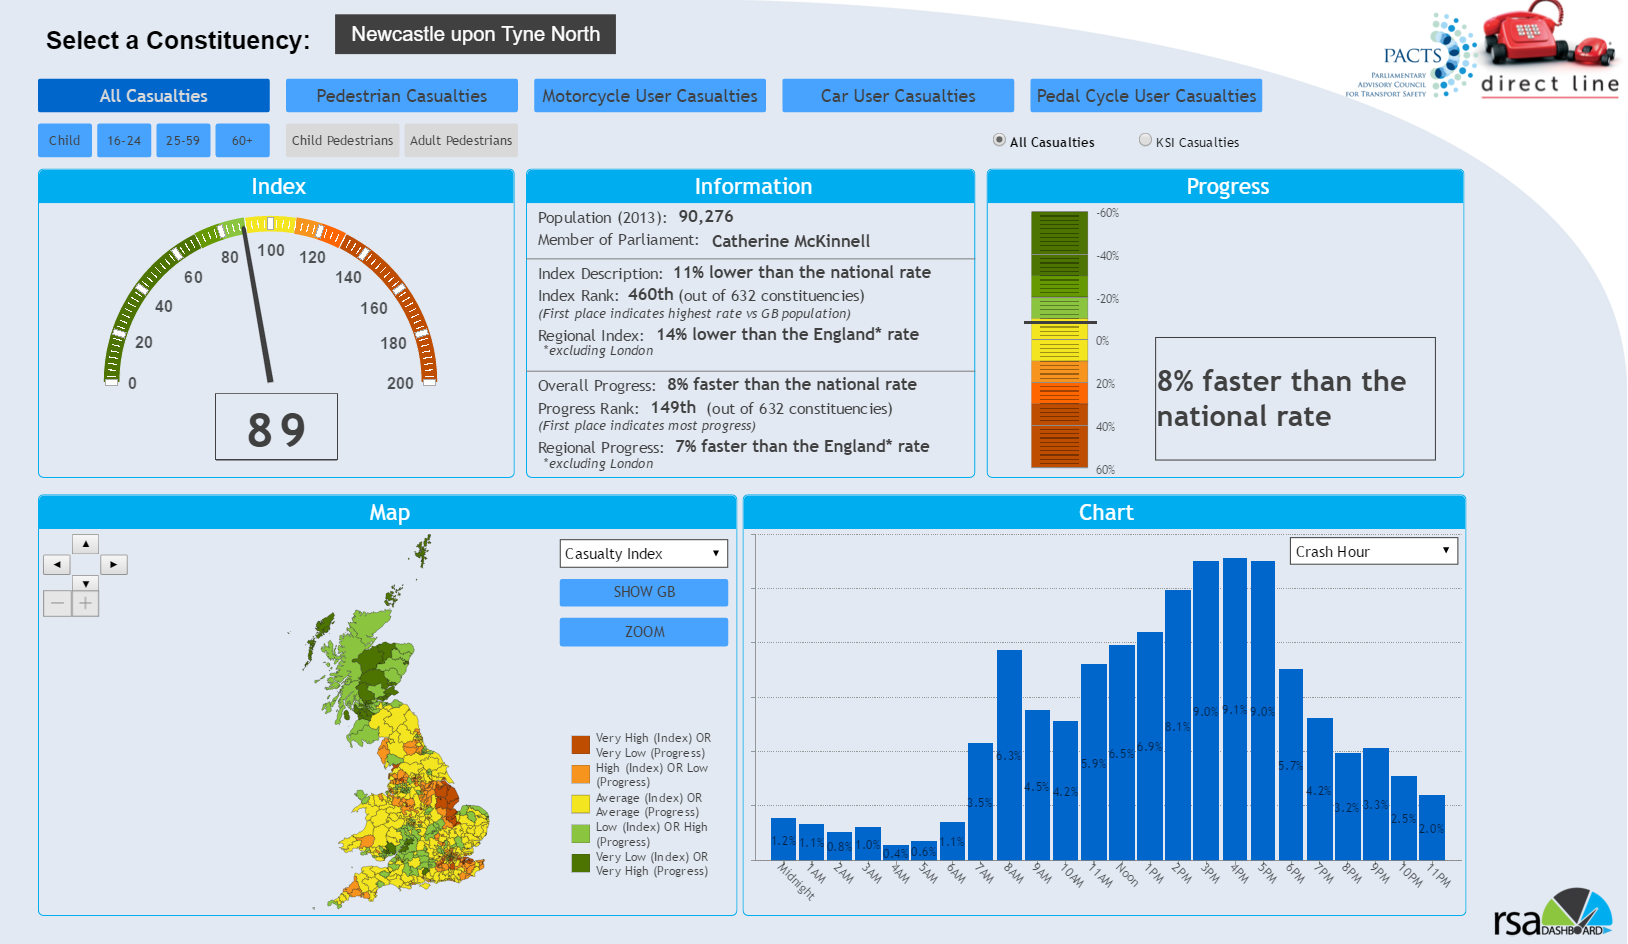 PACTS Constituency Dashboard